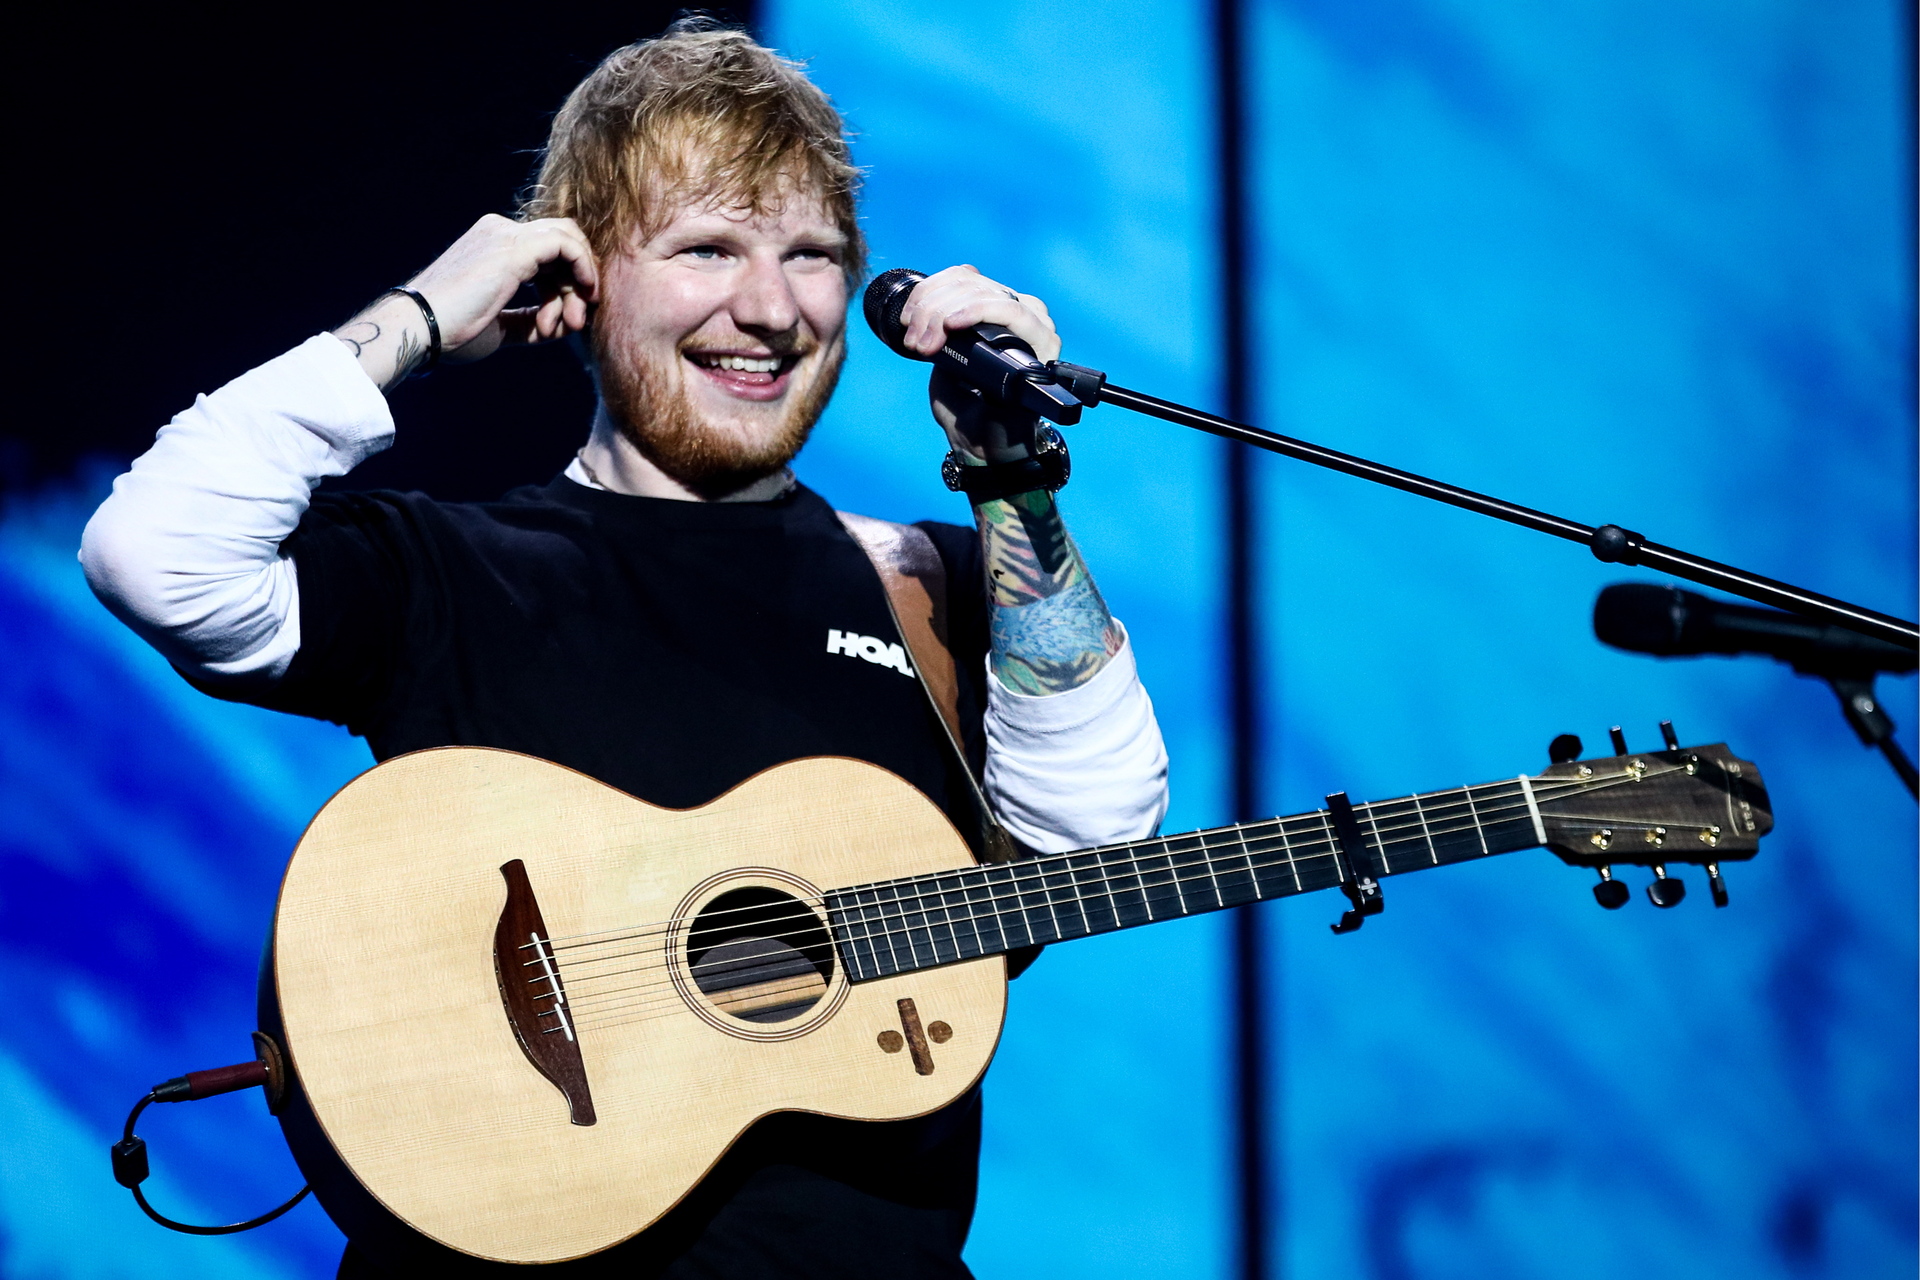 Ed Sheeran Explains Why He Gave Sam Smith a 6-Foot-2 Penis Statue Gift